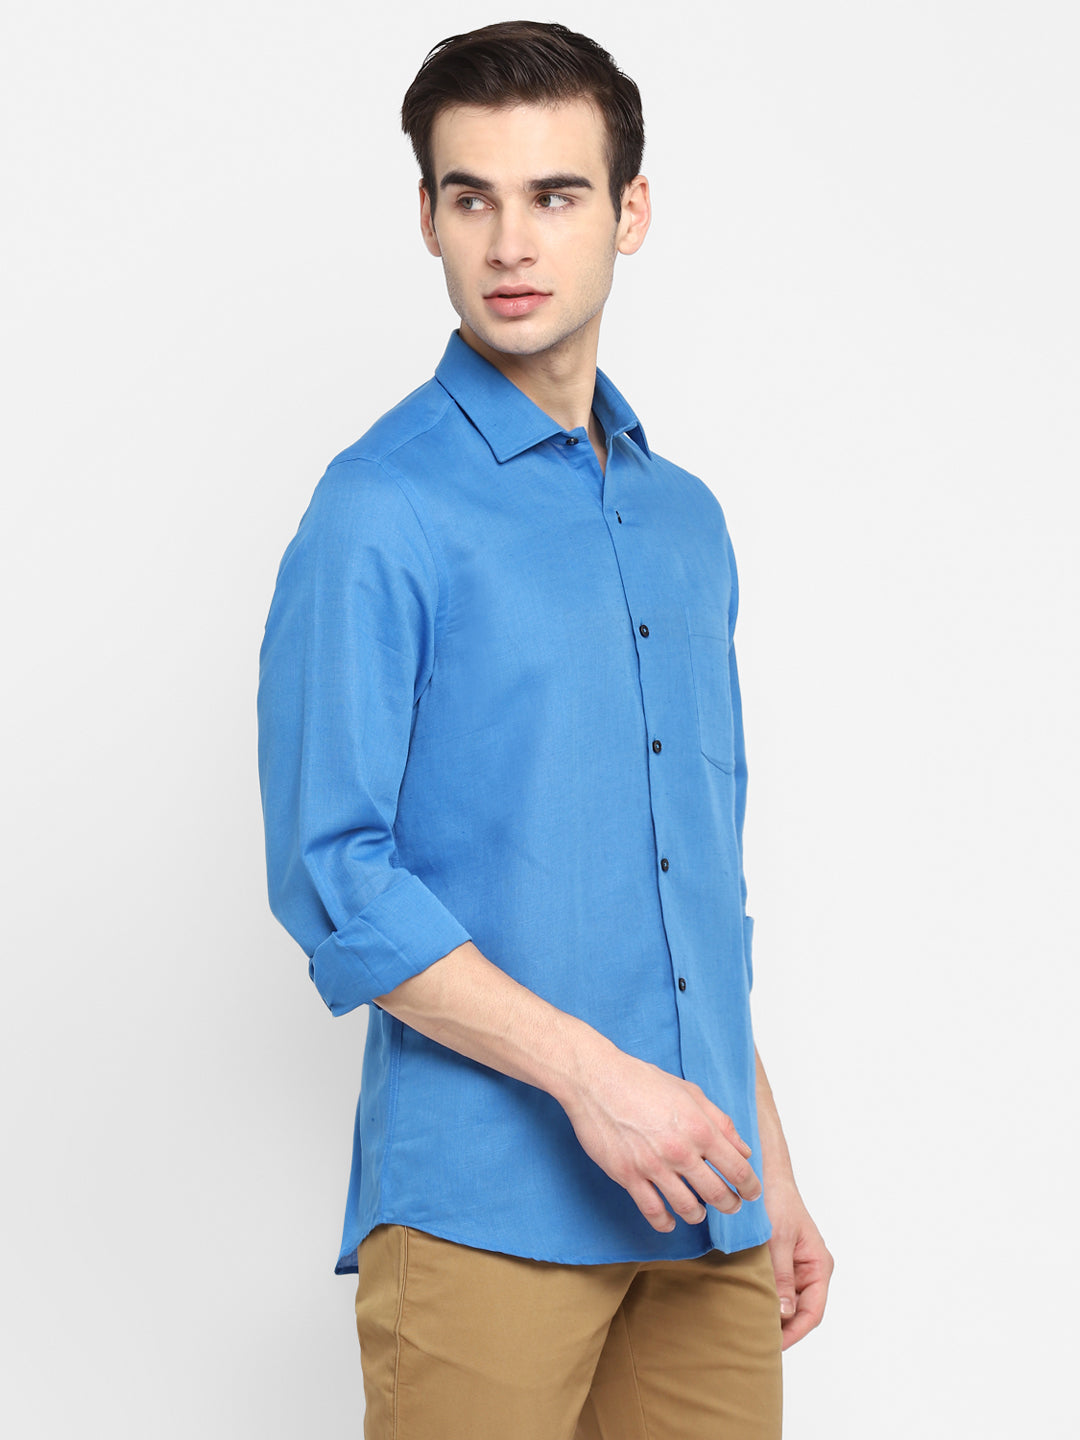 Solid Blue Slim Fit Causal Shirt